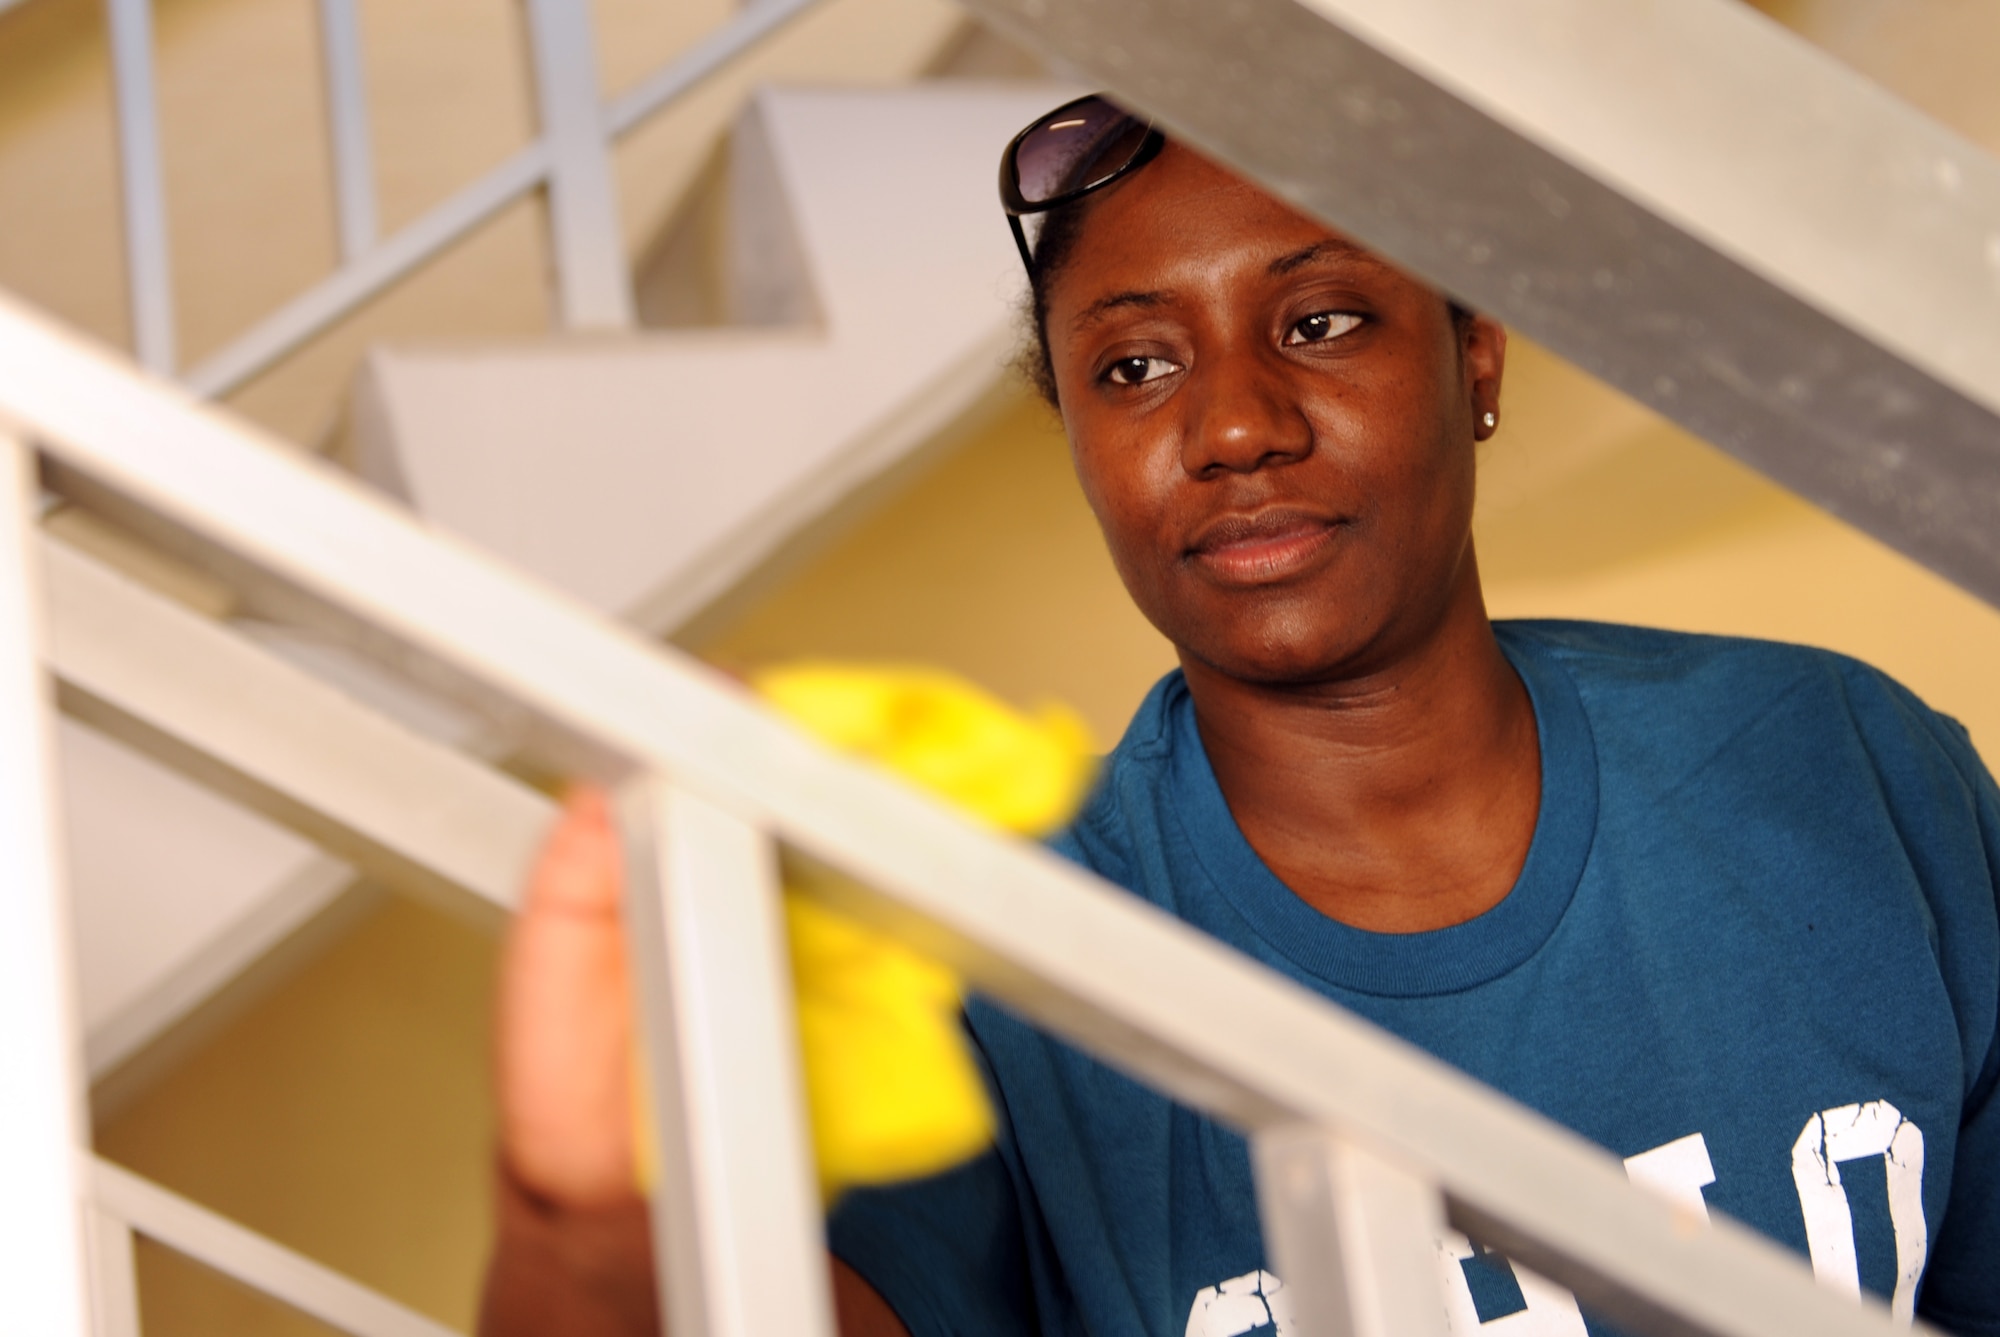 Tech. Sgt. Jameliah Brooks, 39th Maintenance Squadron administrator, cleans the rails of a stairway in the dorms as part of the second annual Dorm Spring Cleaning April 26, 2013, at Incirlik Air Base, Turkey. The cleaning was held as way to for Airmen to take care of the dorms as a team. (U.S. Air Force photo be Senior Airman Daniel Phelps/Released)